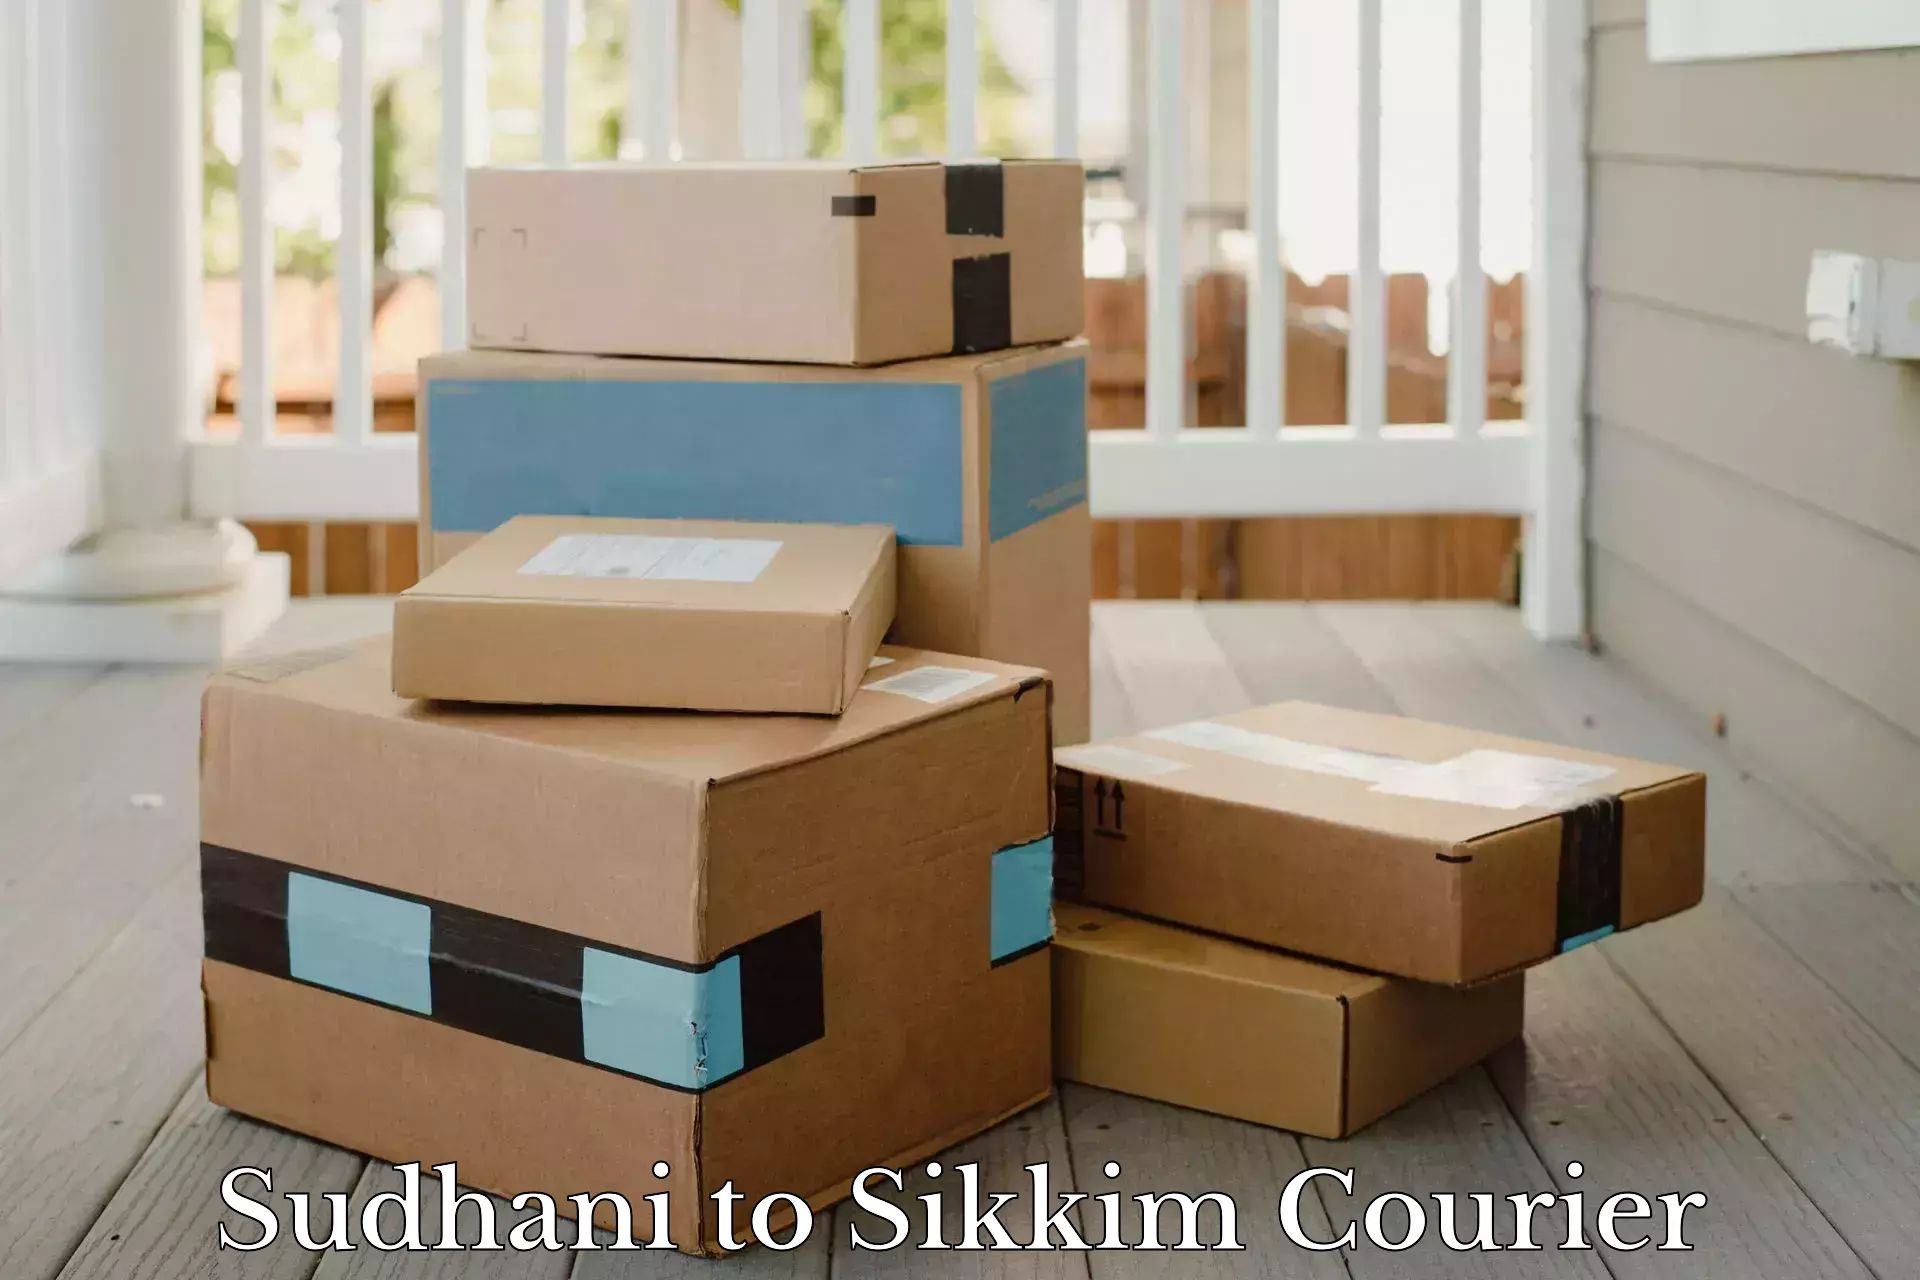 Weekend courier service Sudhani to Pelling